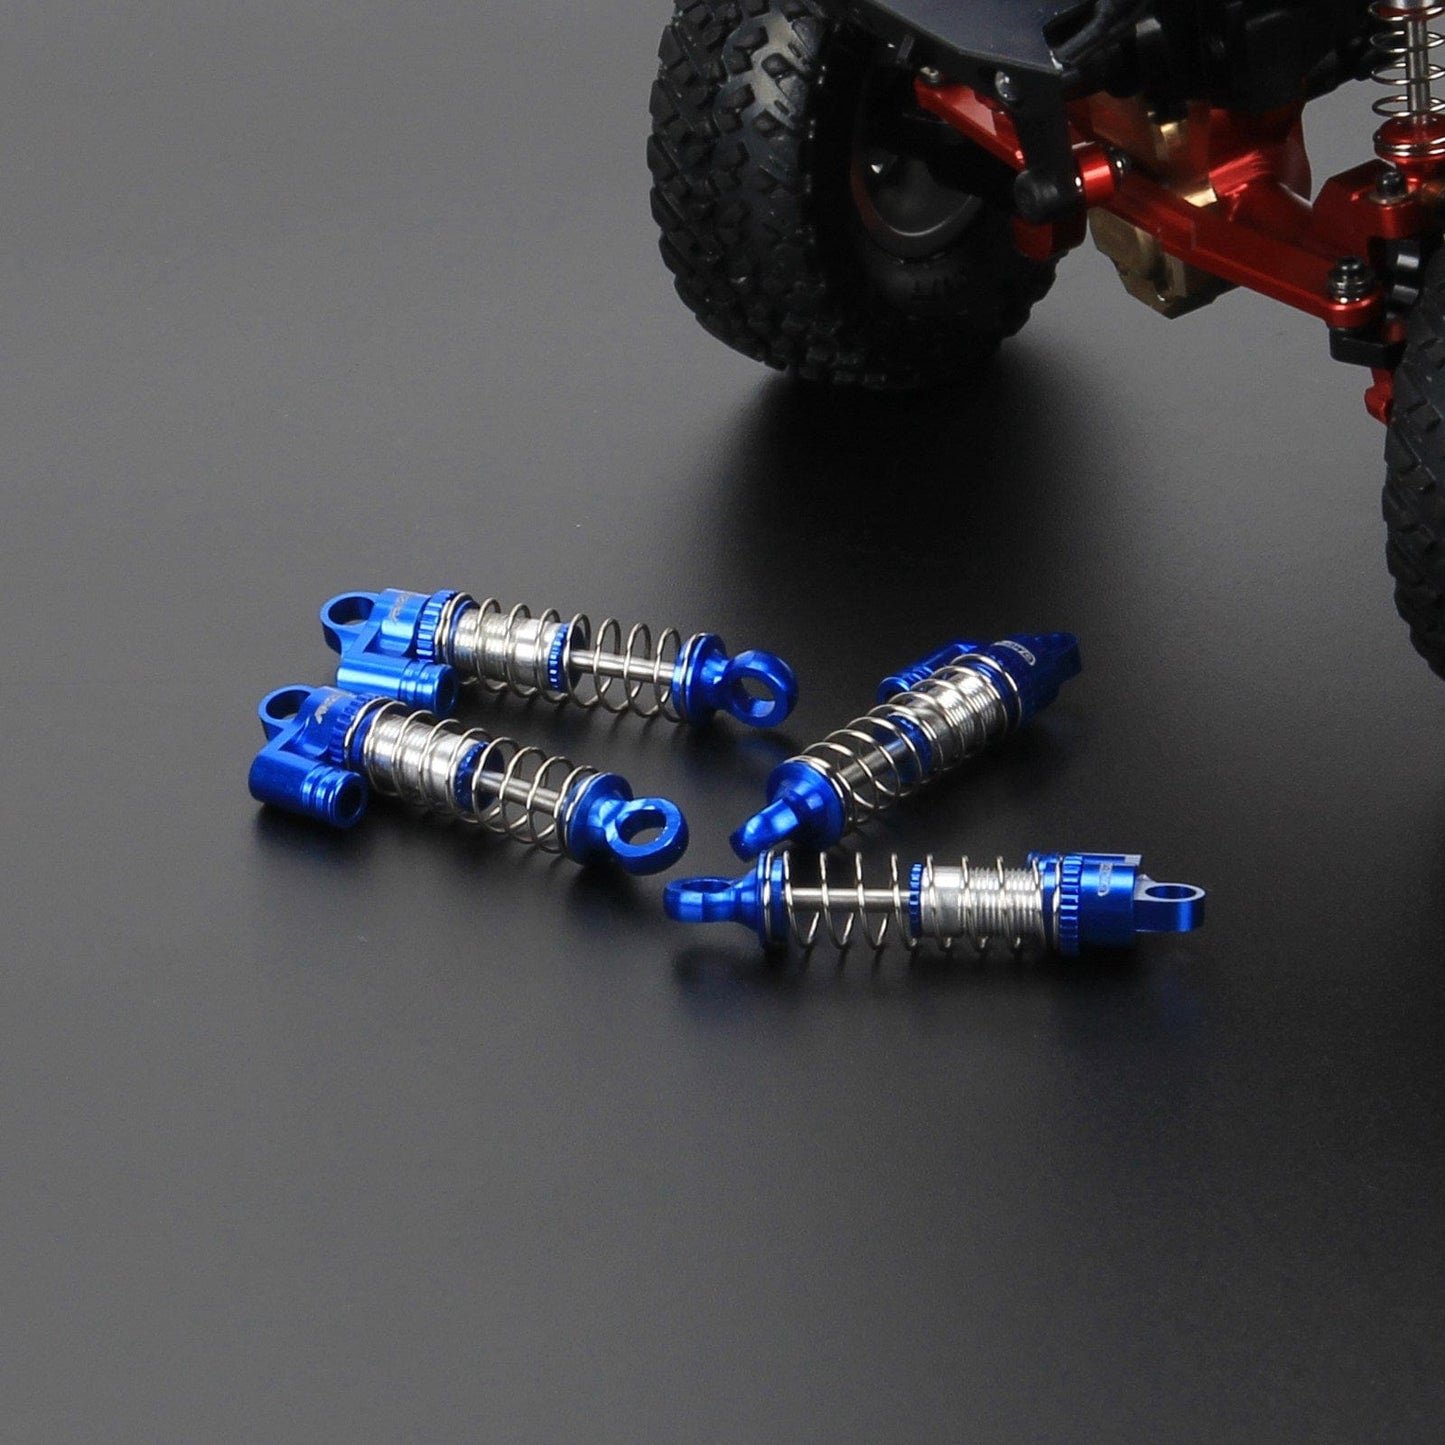 RCAWD RCAWD Axial SCX24 Oil Filled Type Shock Absorber Upgrade Parts